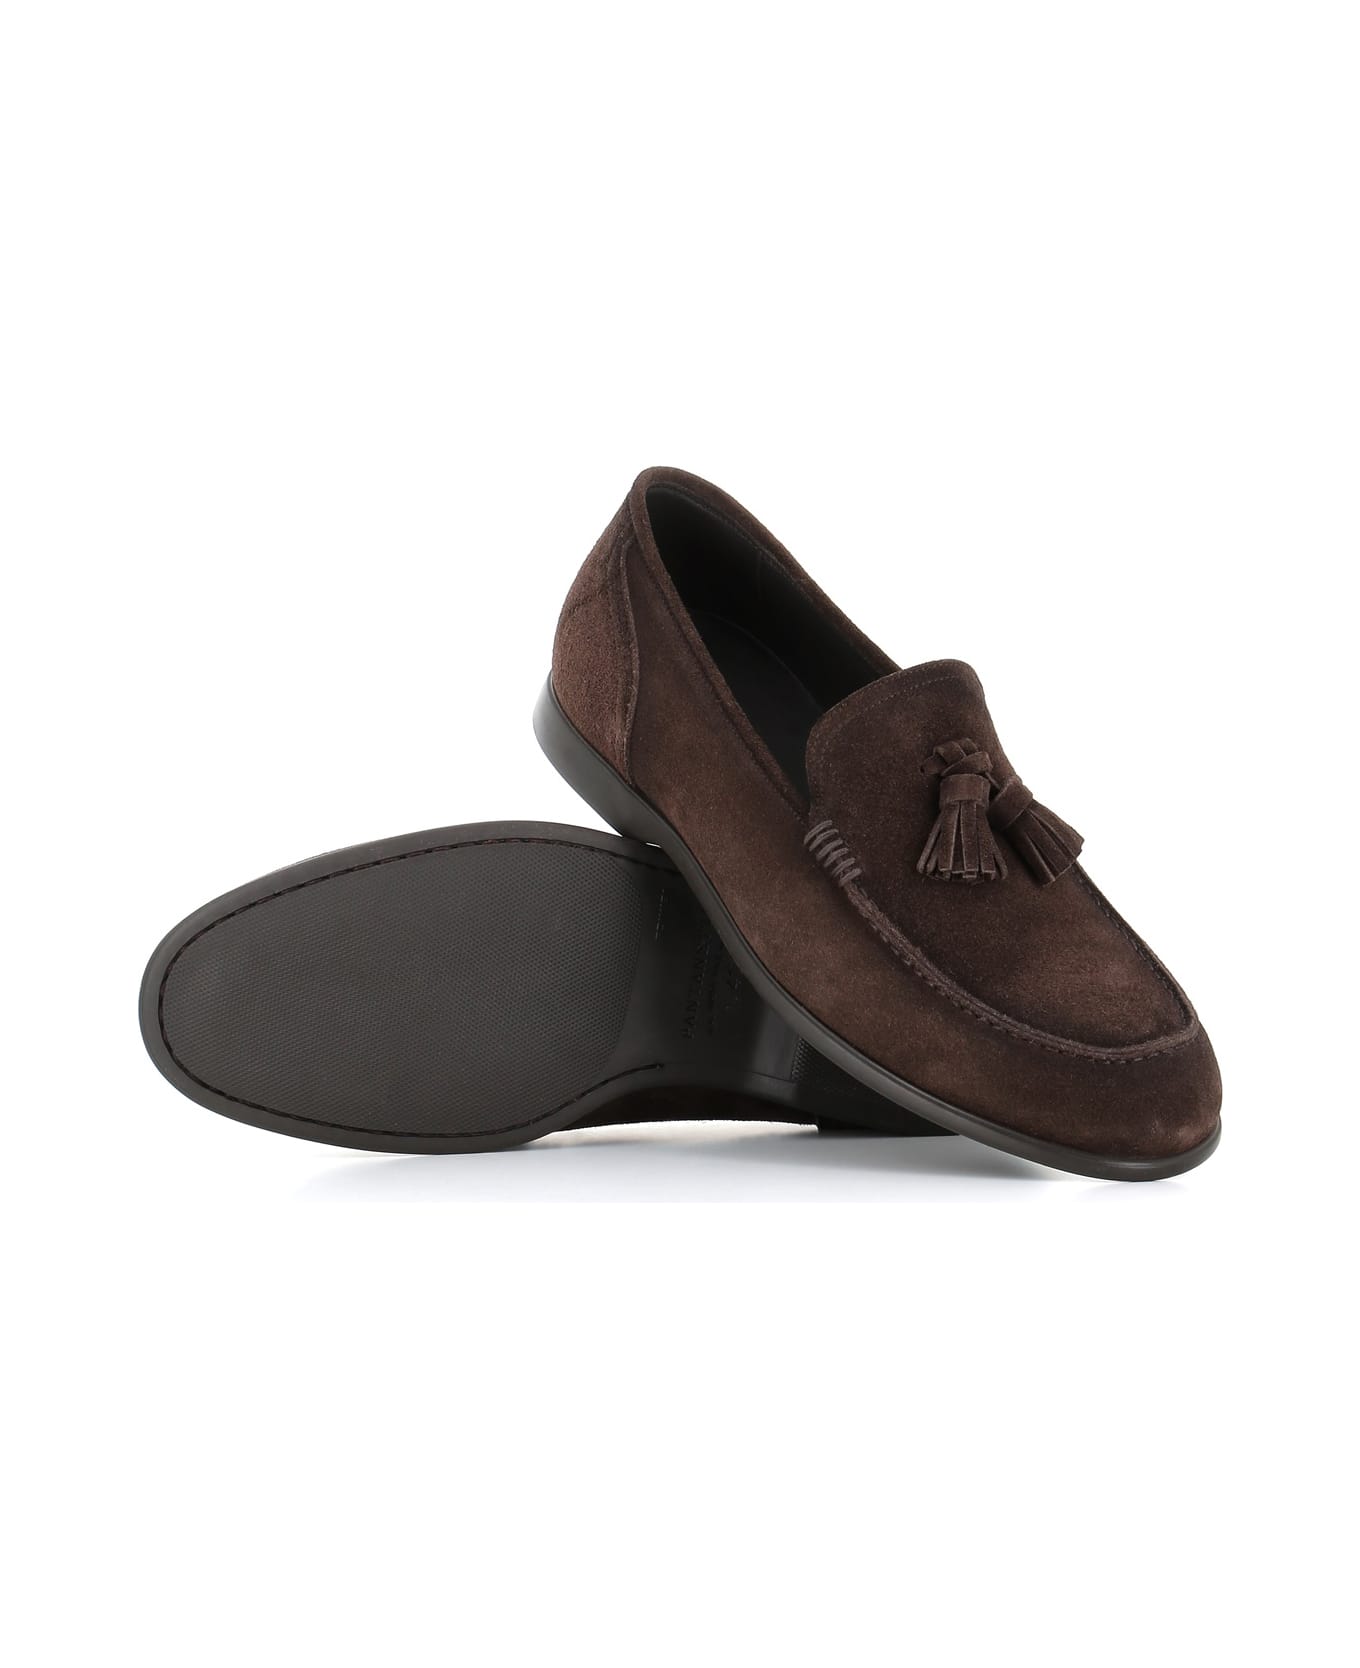 Pantanetti Tassel Loafer 17445a - Brown